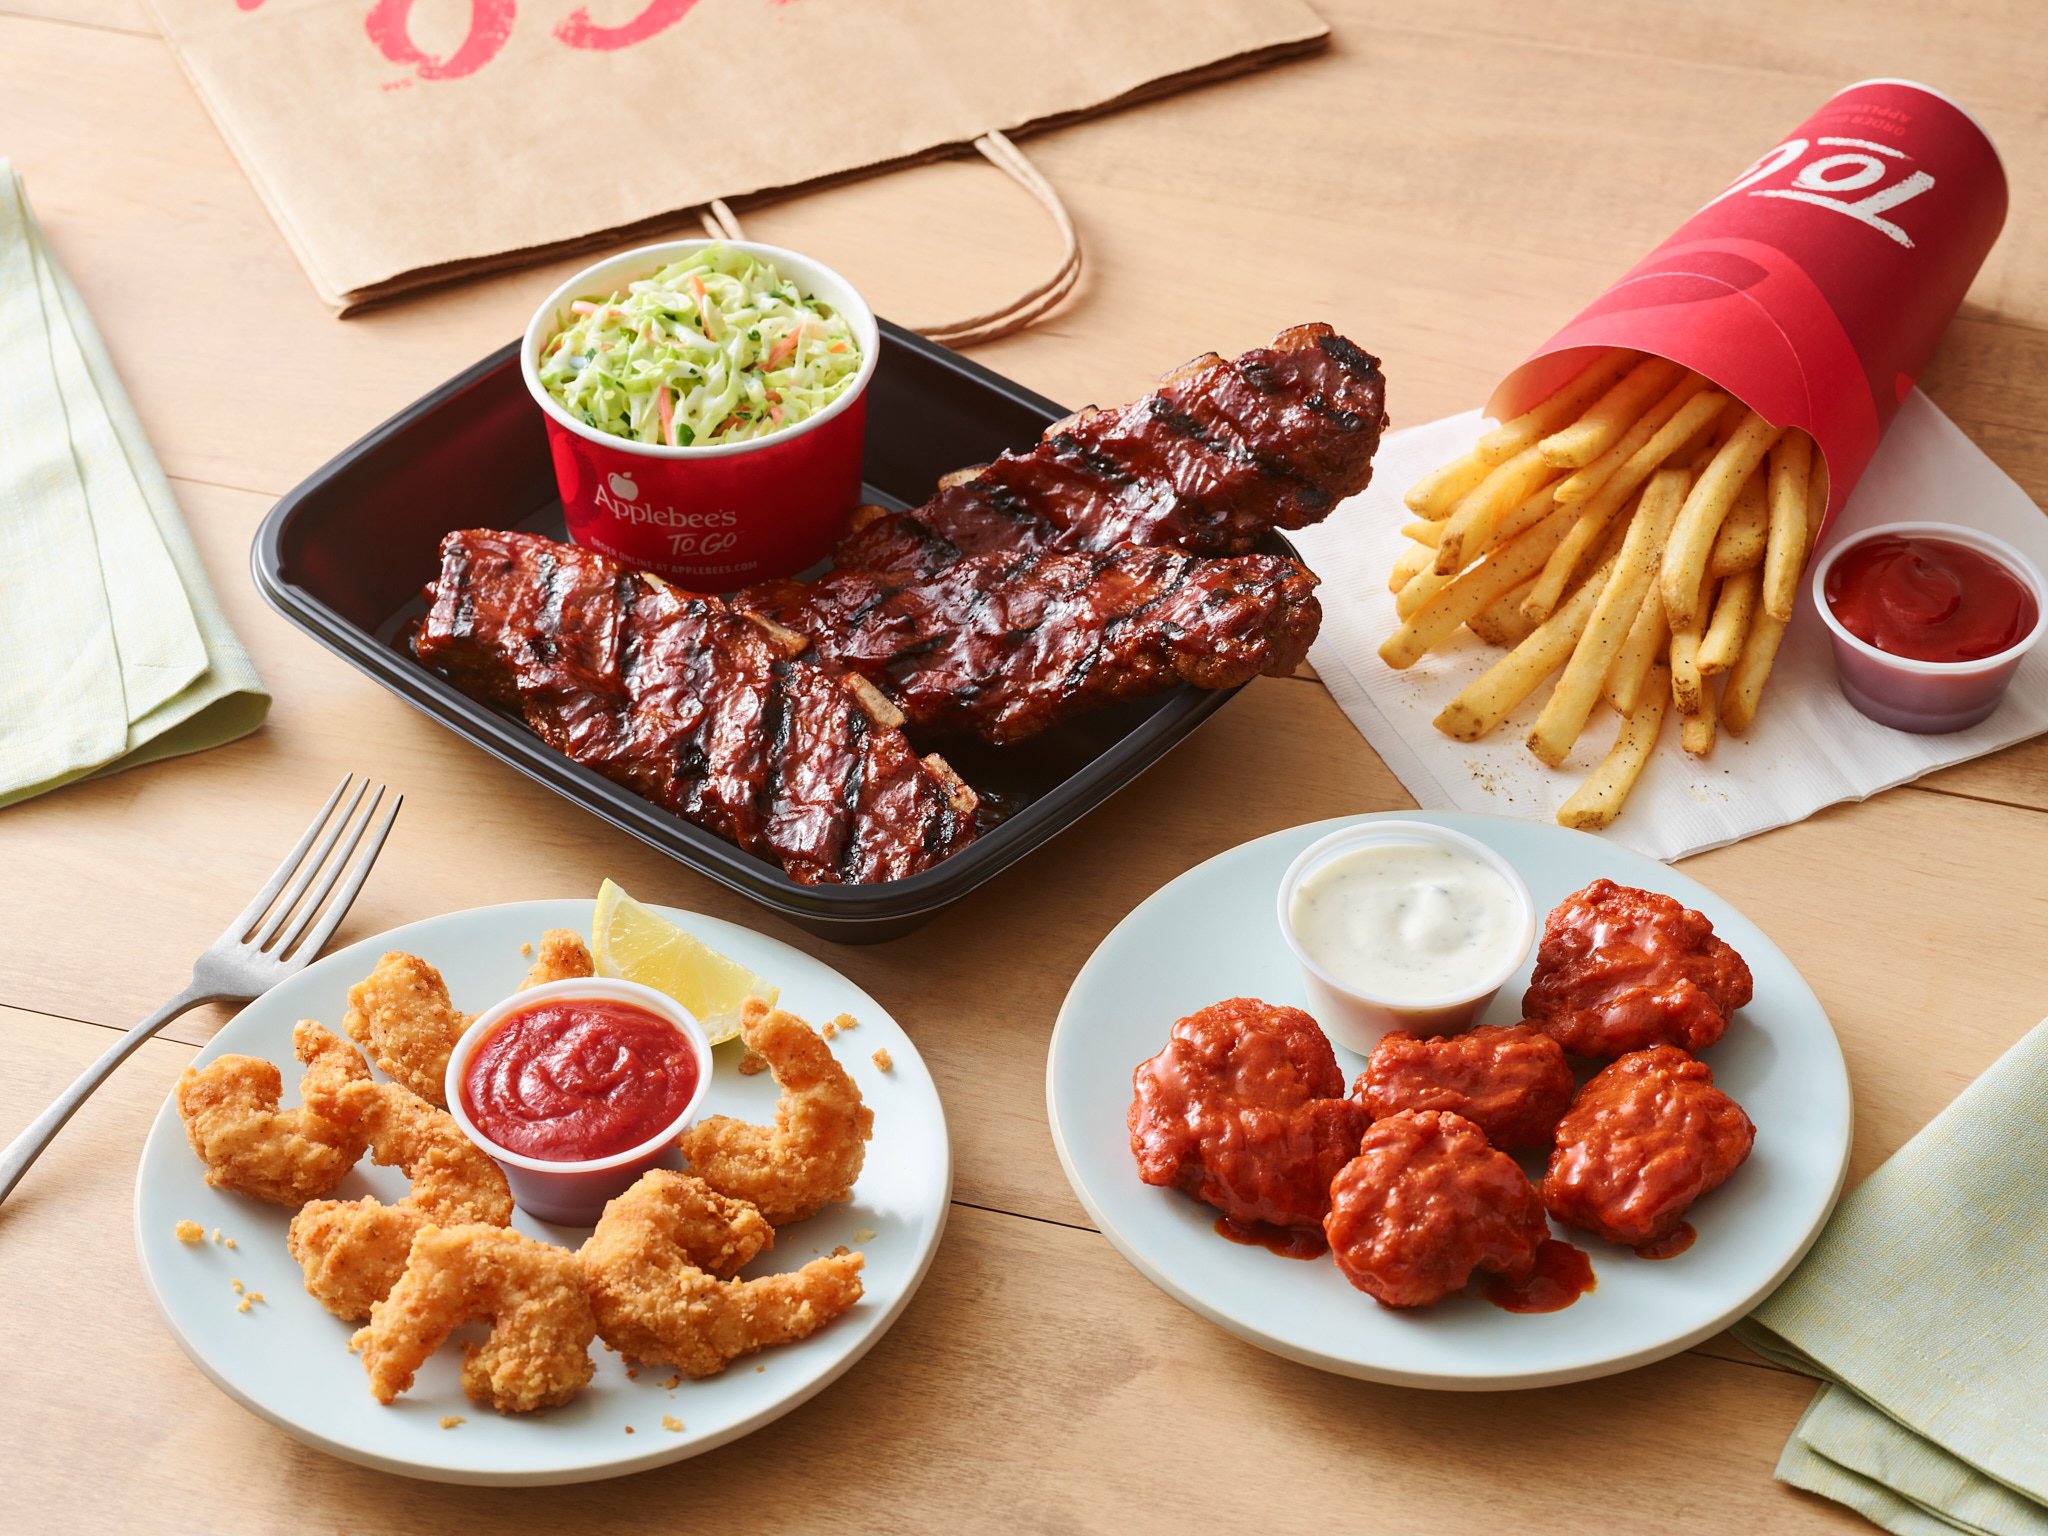 037-6-Boneless-Wings-classic-buffalo-small-plate-Double-Crunch-Shrimp-small-plate-Riblets-Honey-BBQ-initial-order-and-fries-0613-121622-R2-V3.jpg